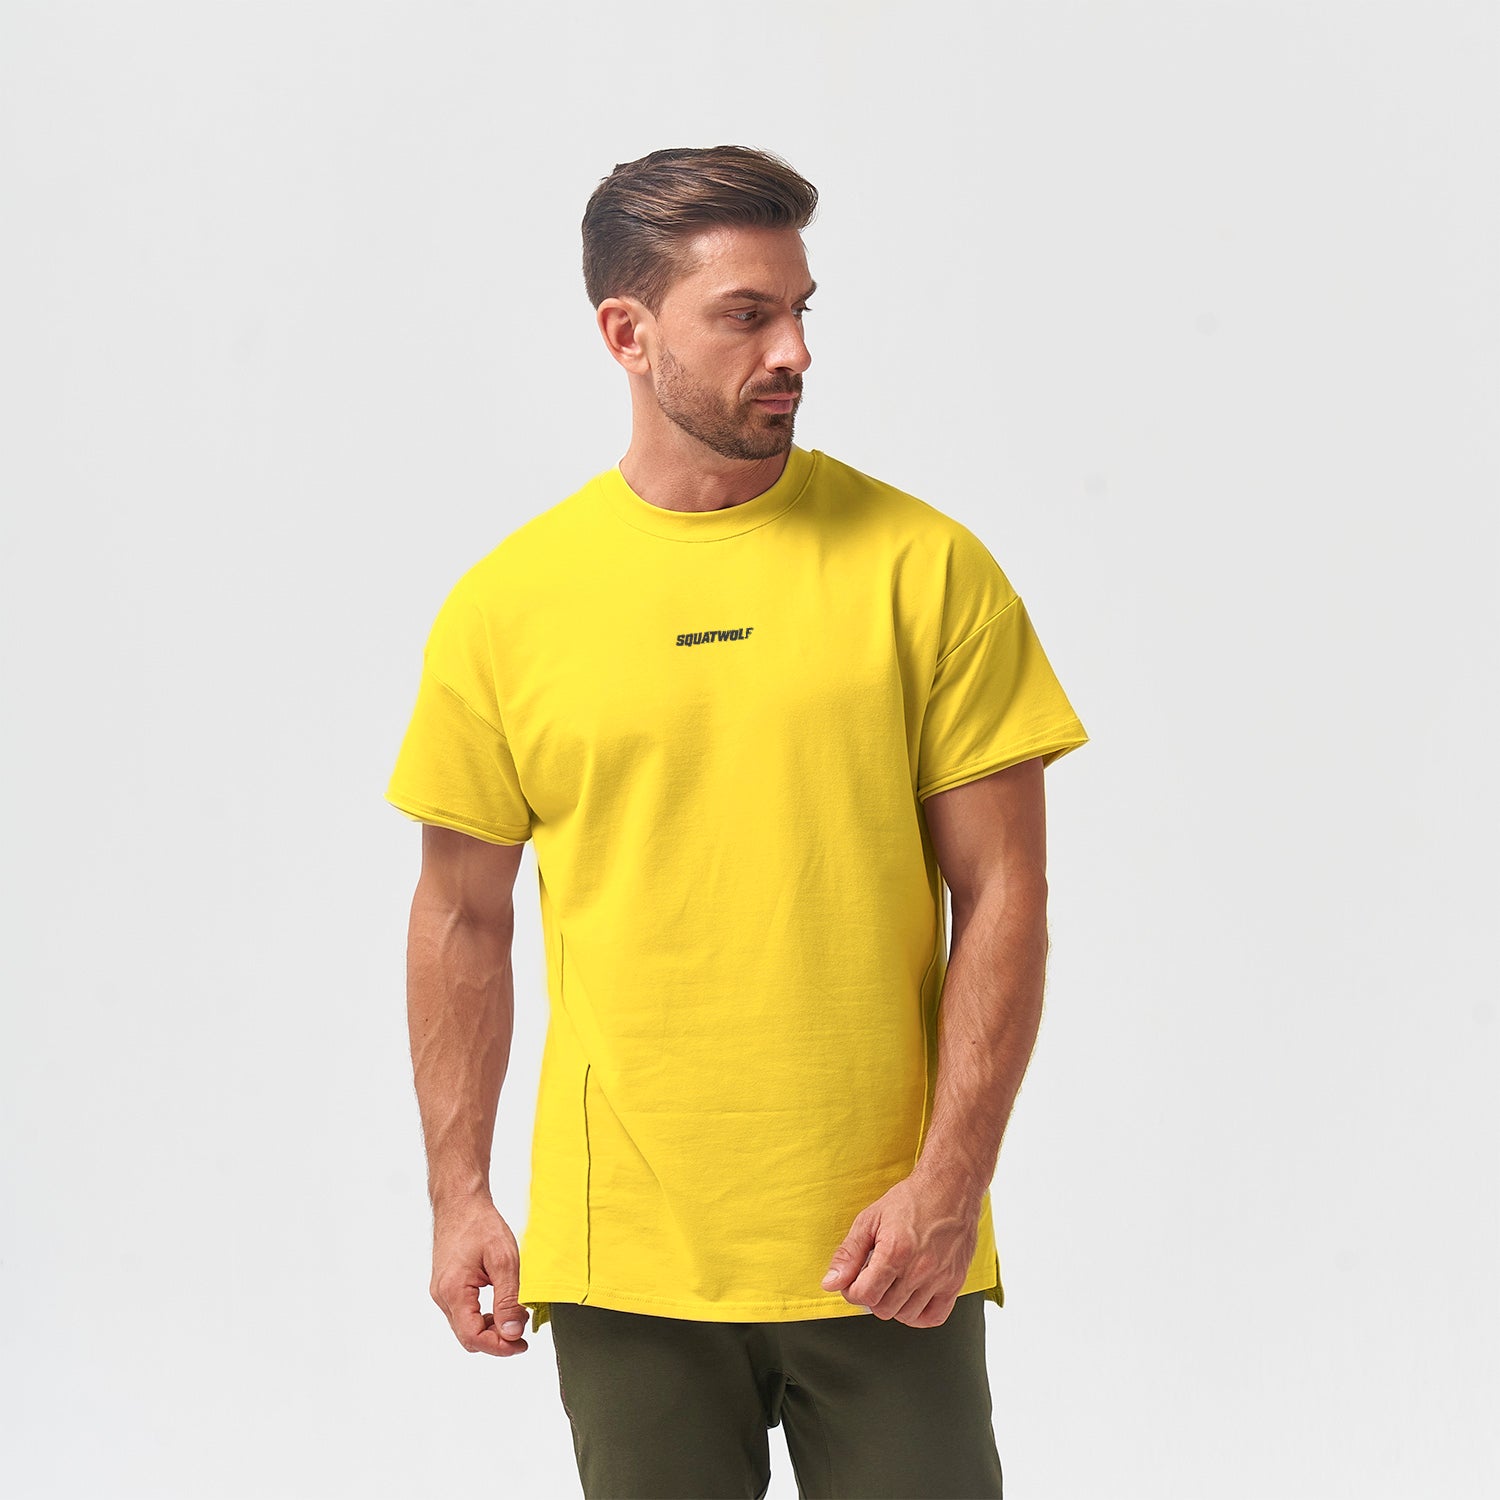 squatwolf-gym-wear-bodybuilding-tee-corn-yellow-workout-shirts-for-men